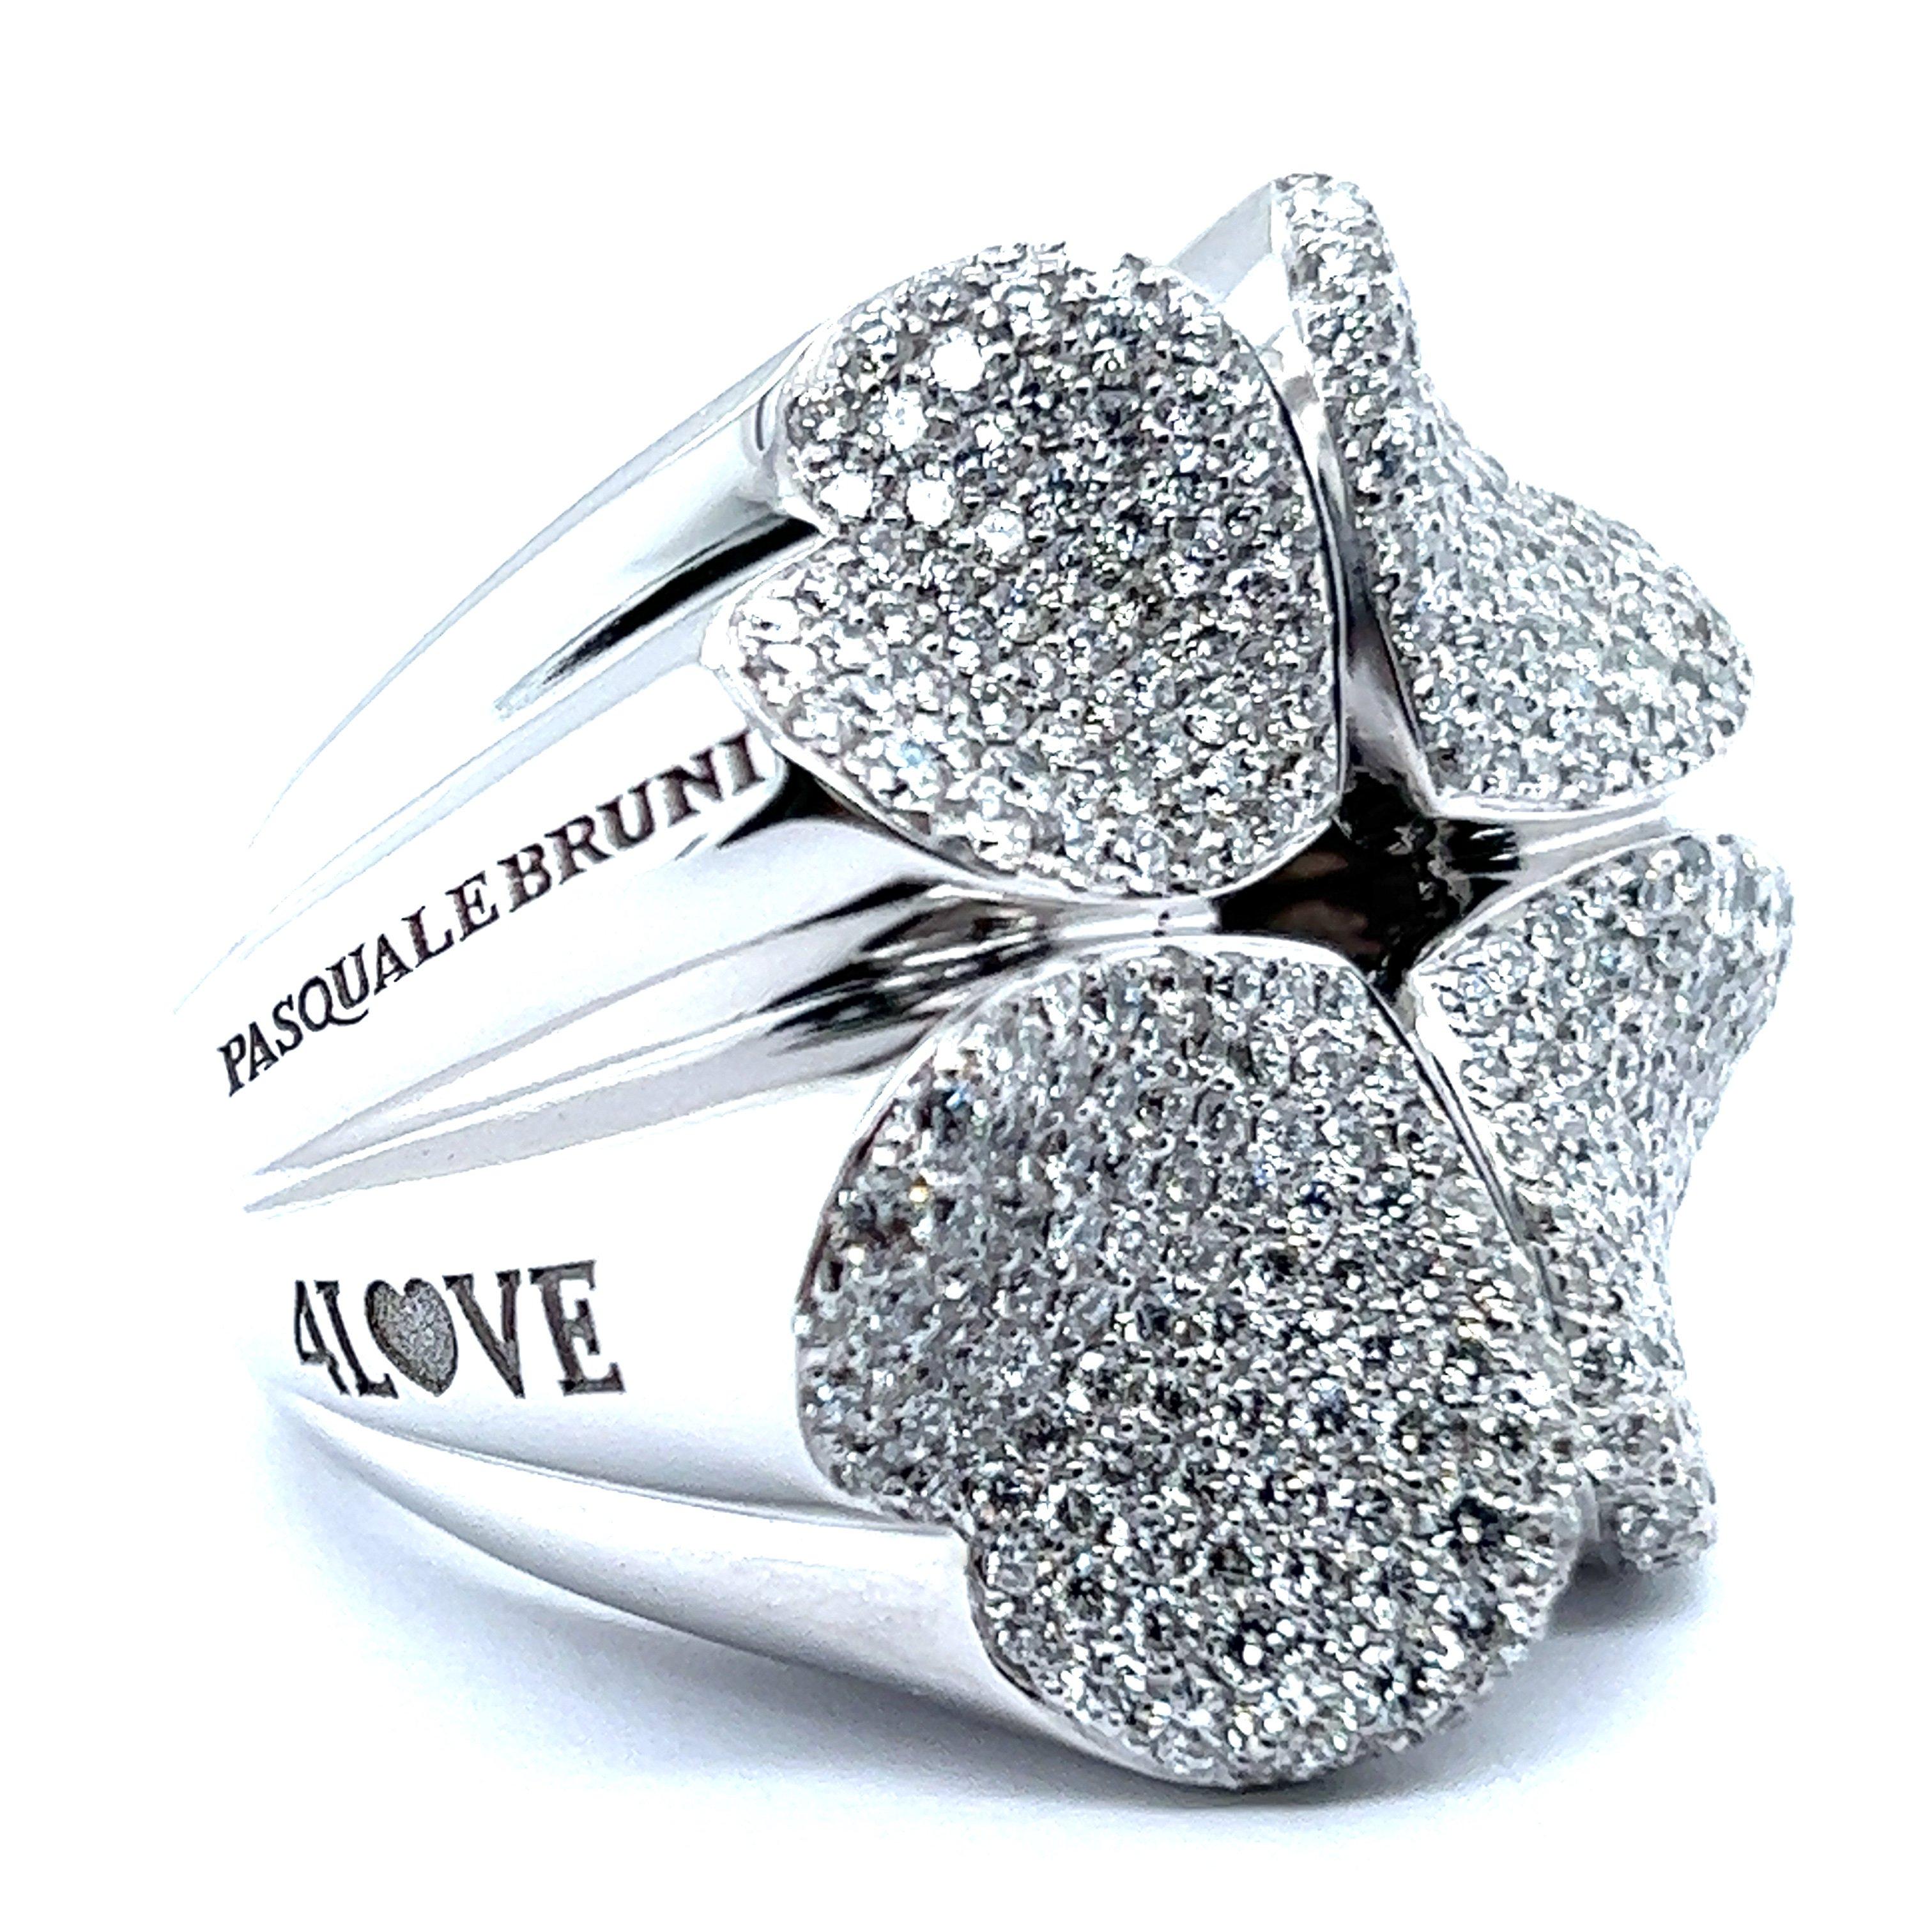 Watch out, this radiant diamond ring in 18 Karat white gold by Pasquale Bruni is about to steal your heart!

Pasquale Bruni is an esteemed Italian jewelry company that was founded in 1968 and is based in Valenza, a city known for its rich heritage